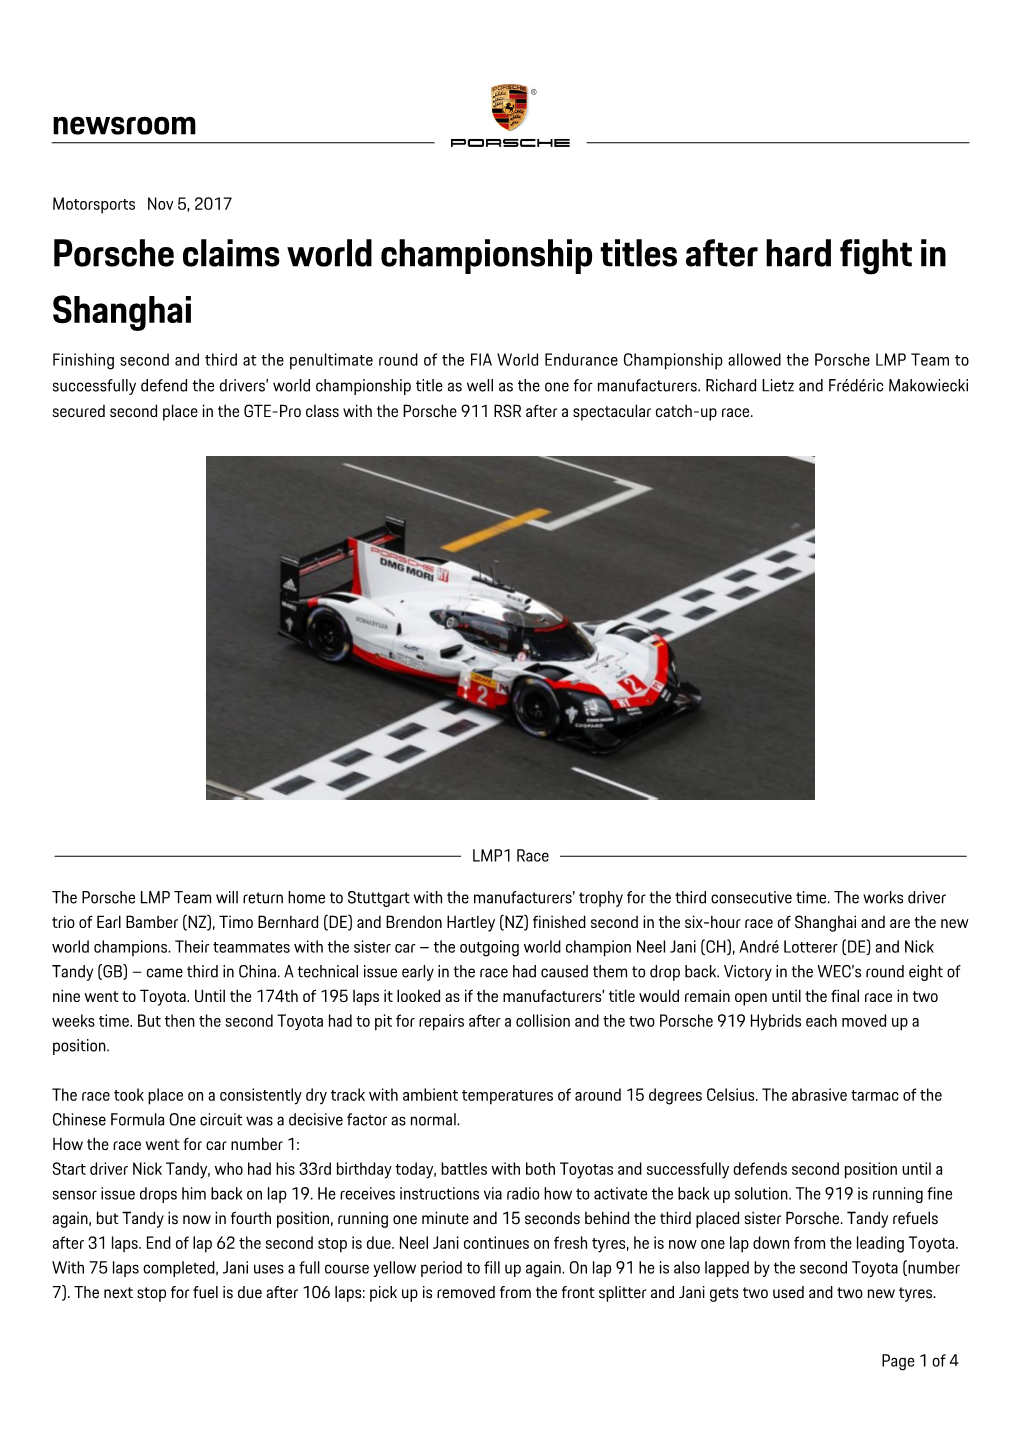 Porsche Claims World Championship Titles After Hard Fight in Shanghai